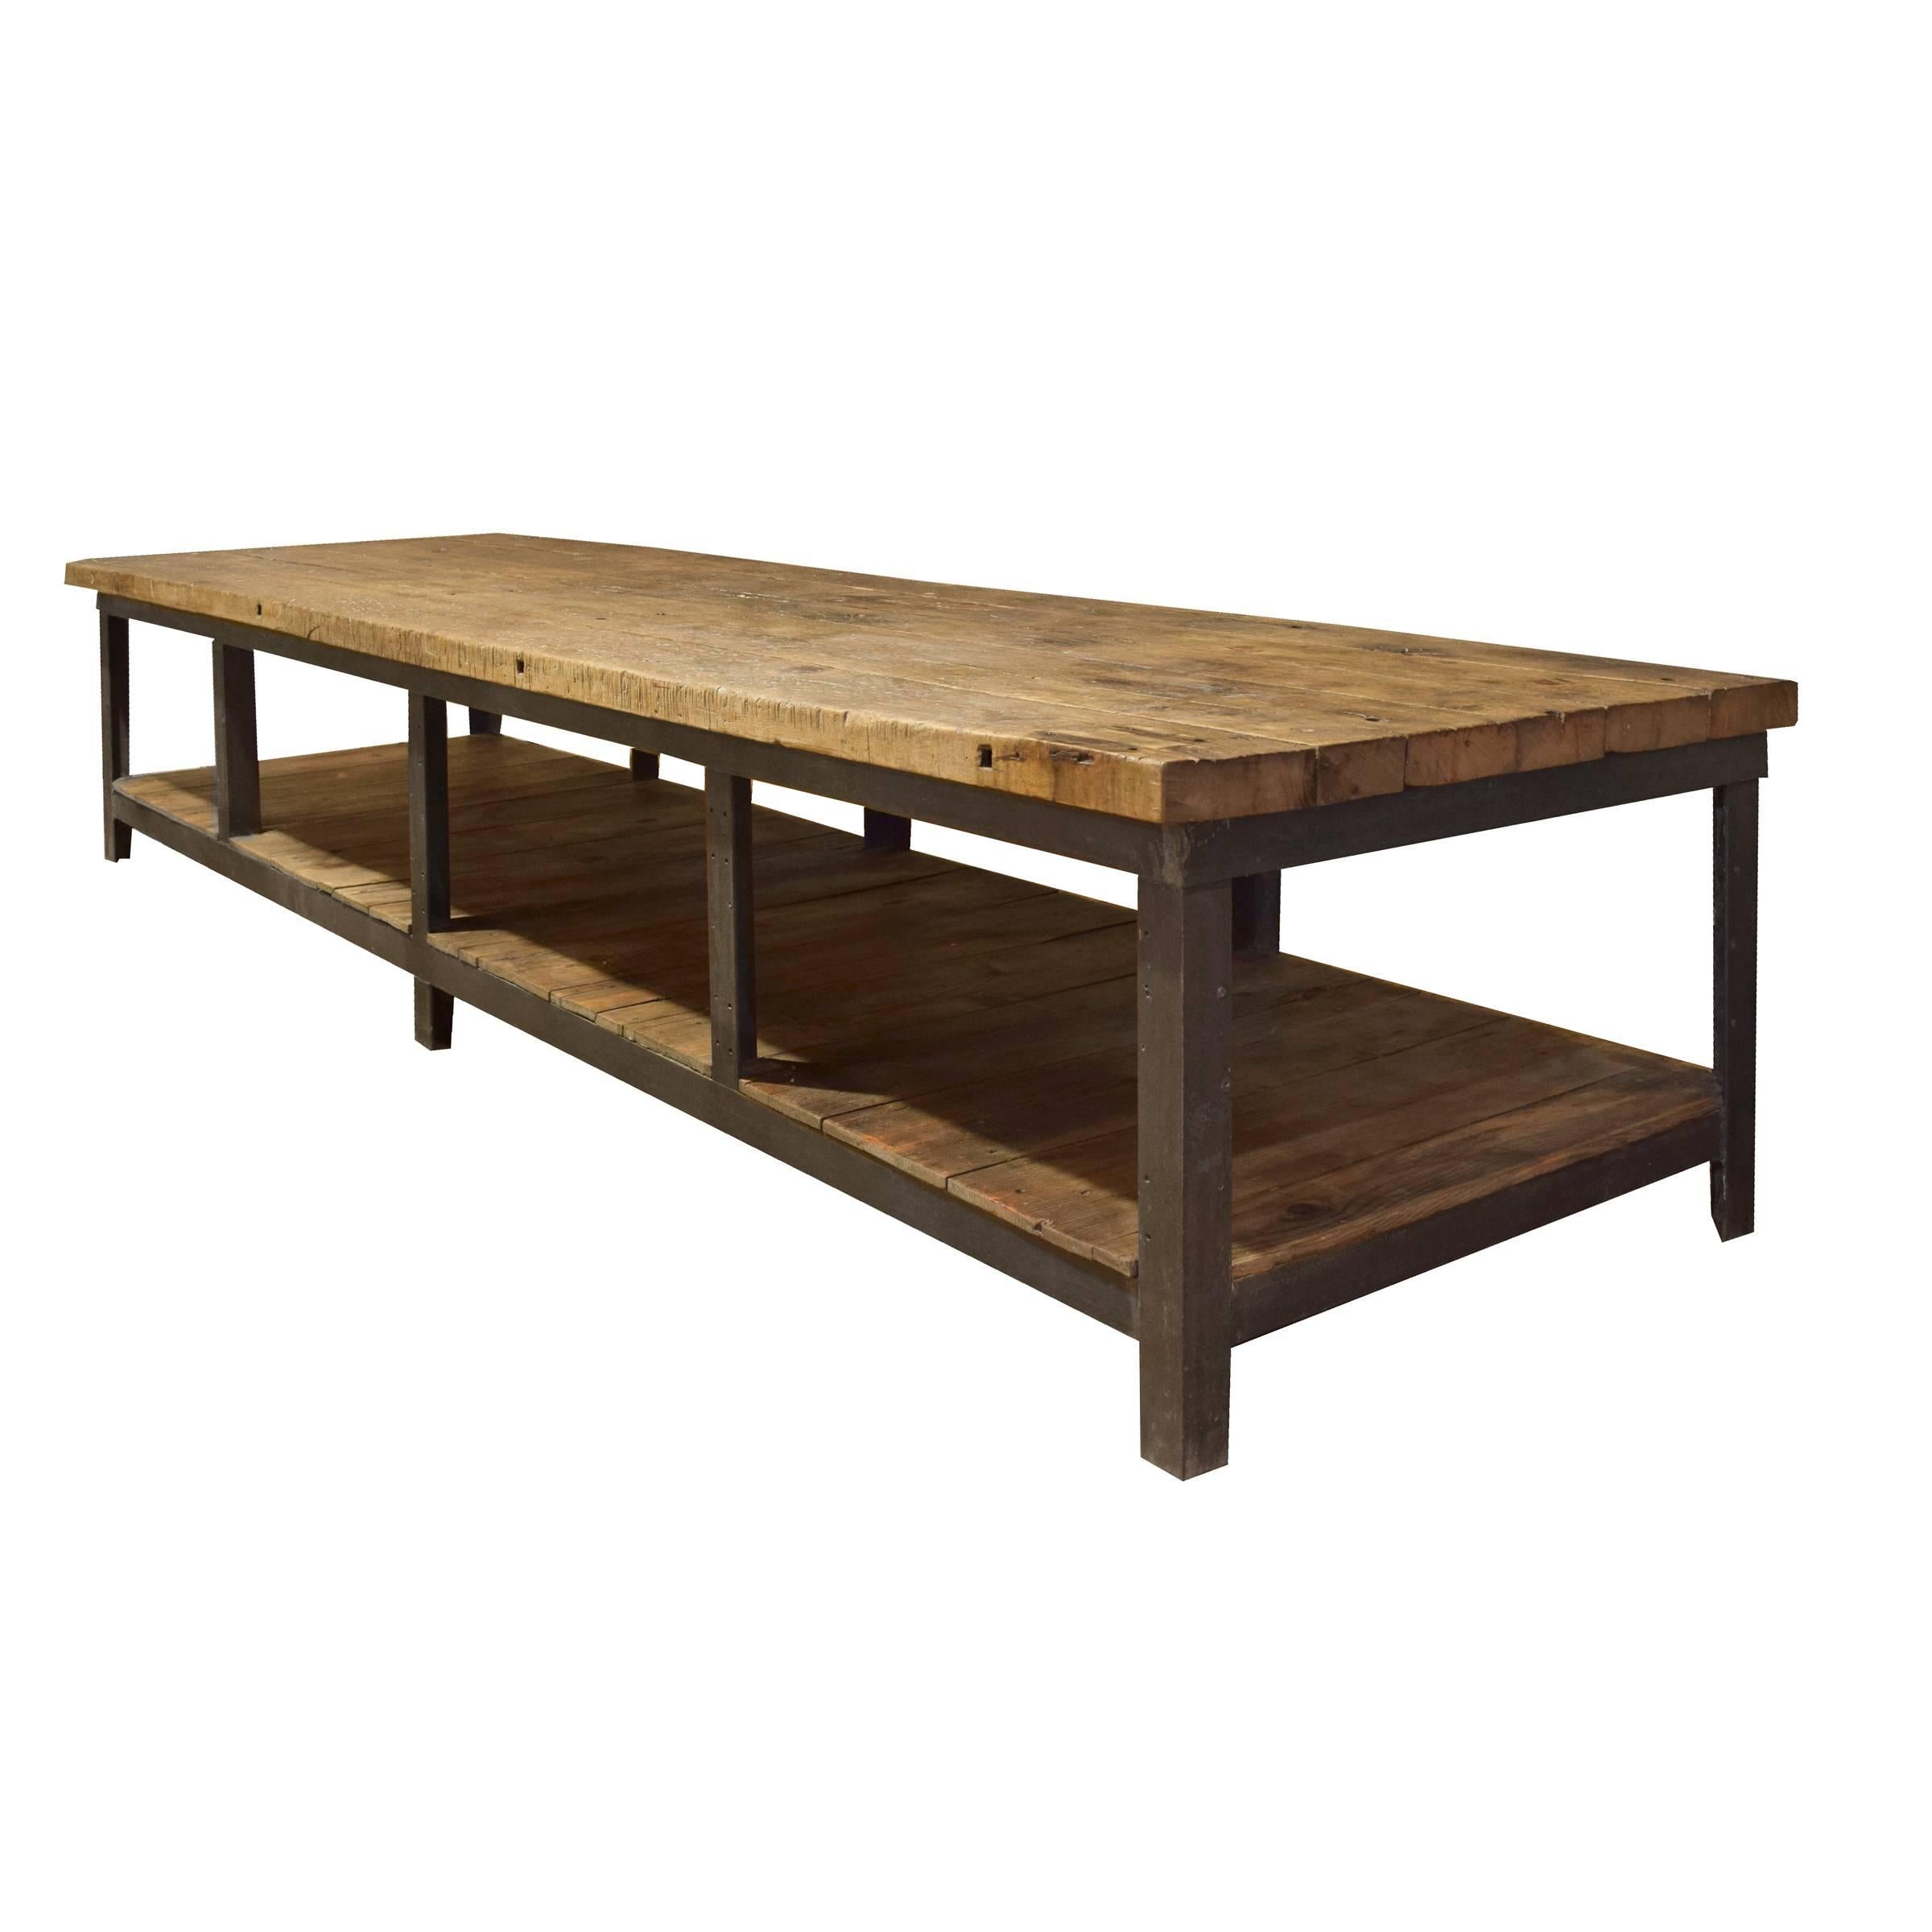 An incredible American Industrial table with an iron frame, well-worn wood top and wood shelf, from the Bethlehem Steel Co., PA.